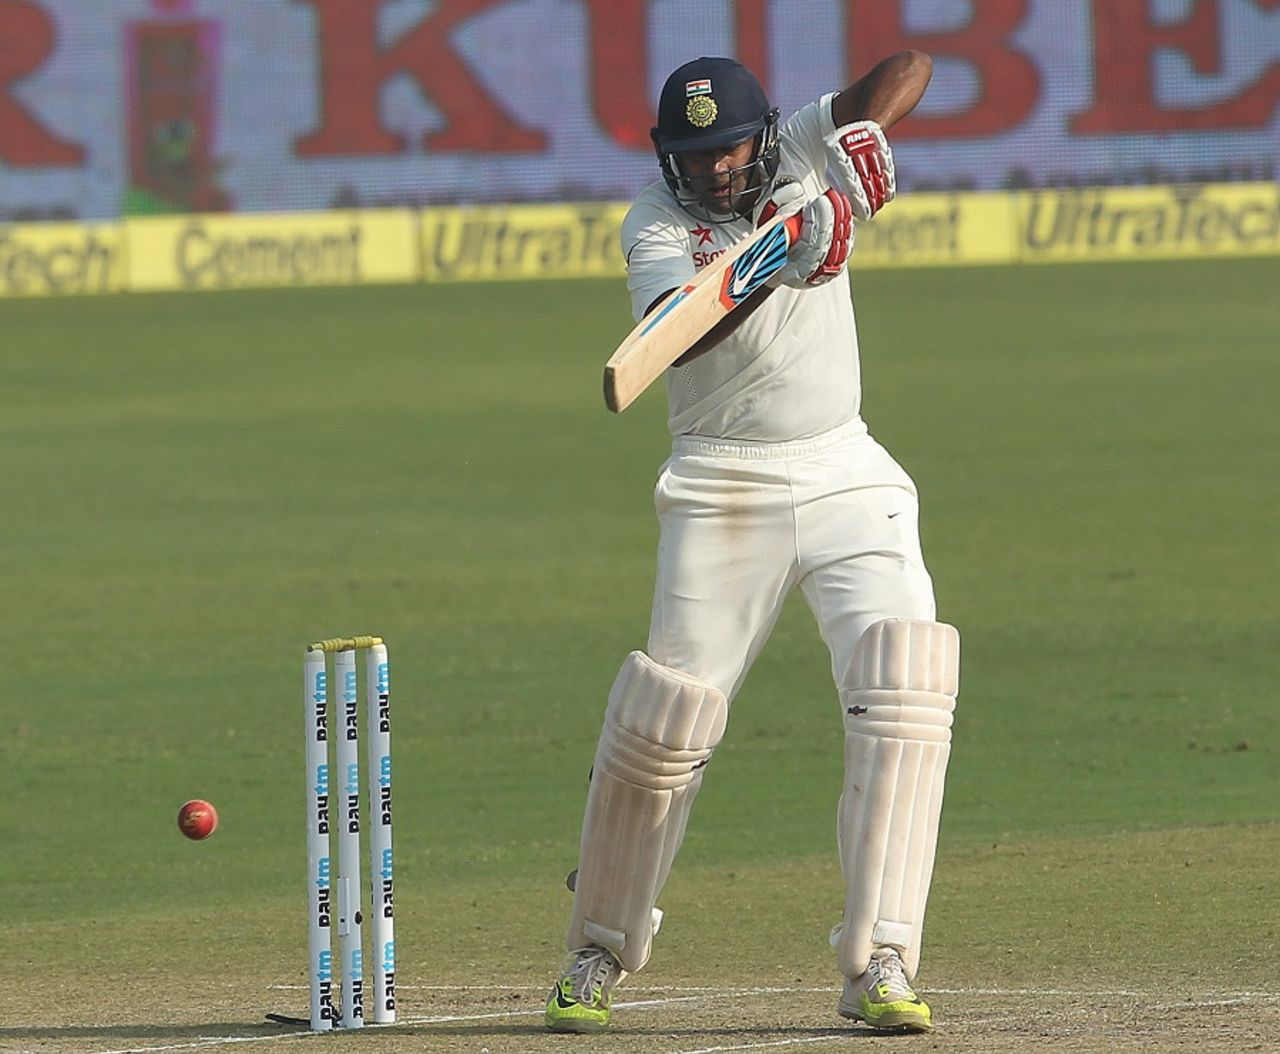 R Ashwin strokes one through the off side,  India v South Africa, 4th Test, Delhi, 2nd day, December 4, 2015